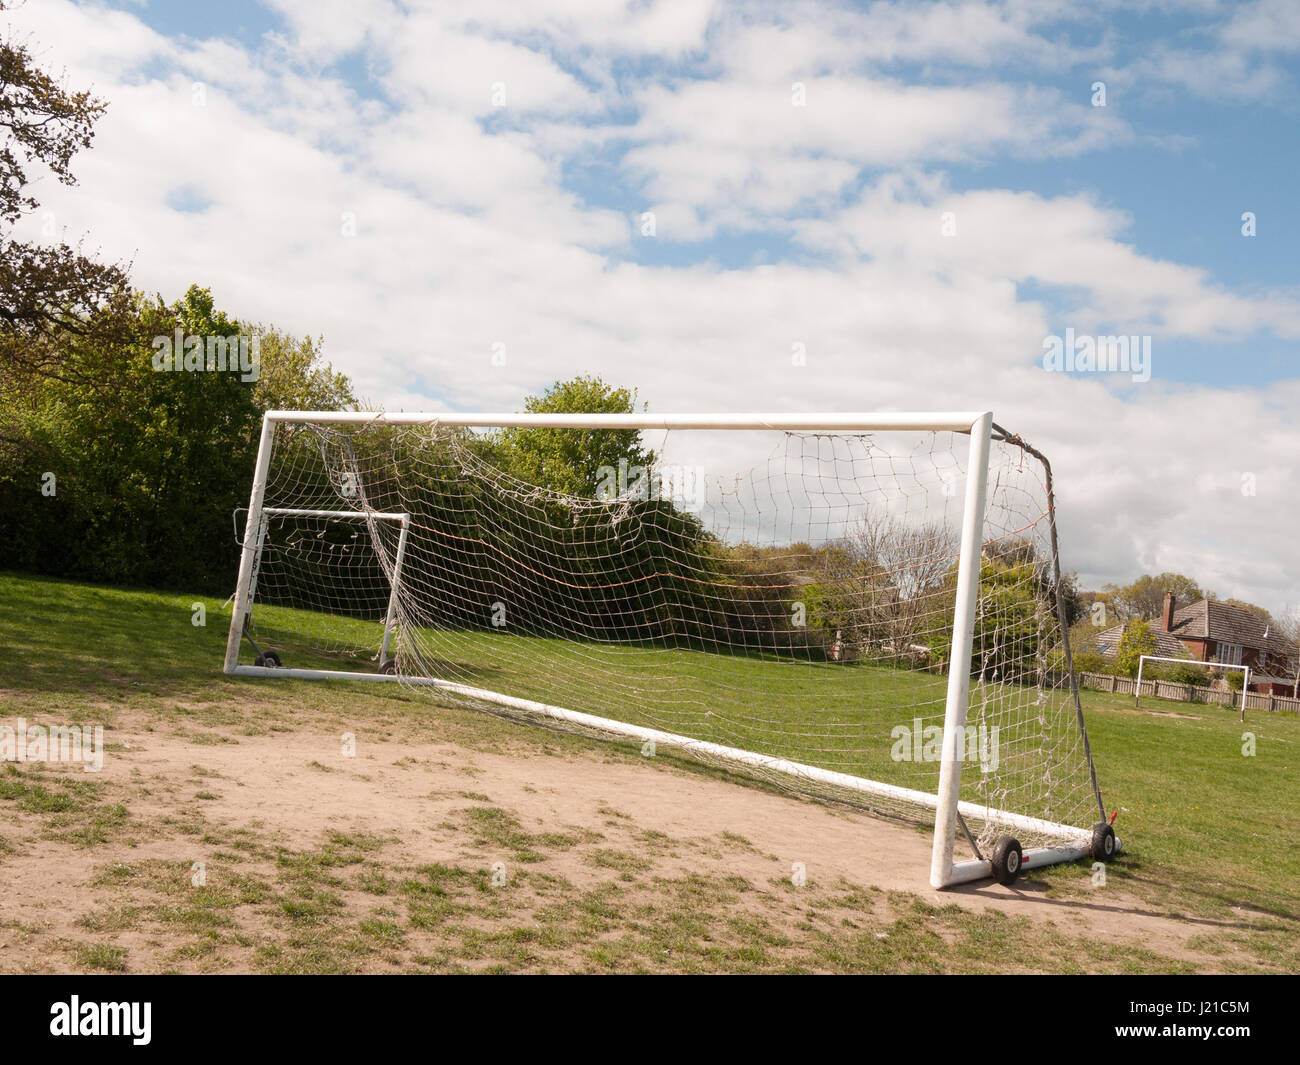 An Empty and Unused Goal Post with A White Net in the Middle of A Park with Grass and Soil on the Ground, Wheels on the Frame to Help Move it and Hous Stock Photo